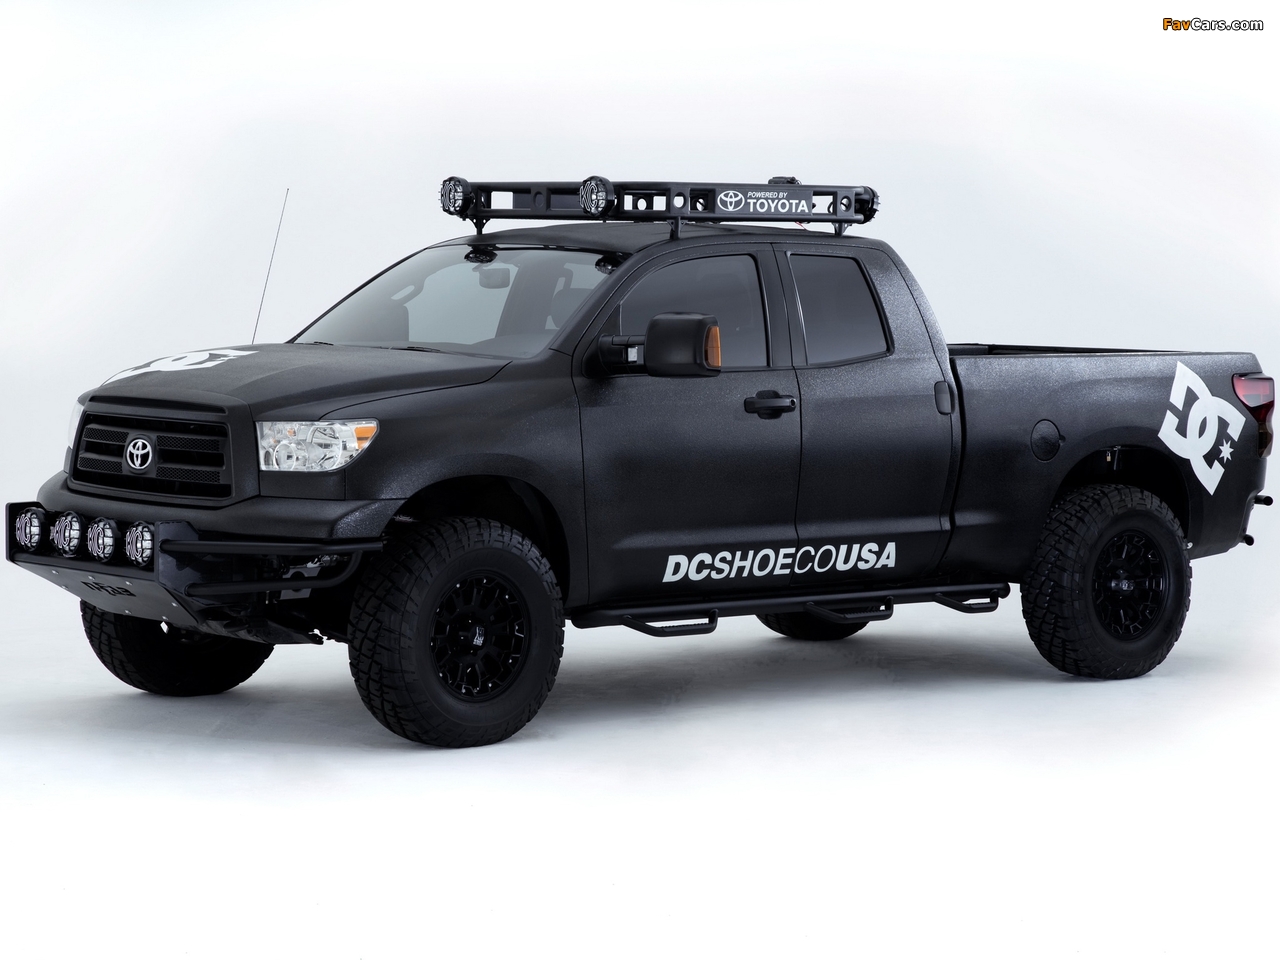 Toyota Ultimate Motocross Tundra Truck 2011 pictures (1280 x 960)